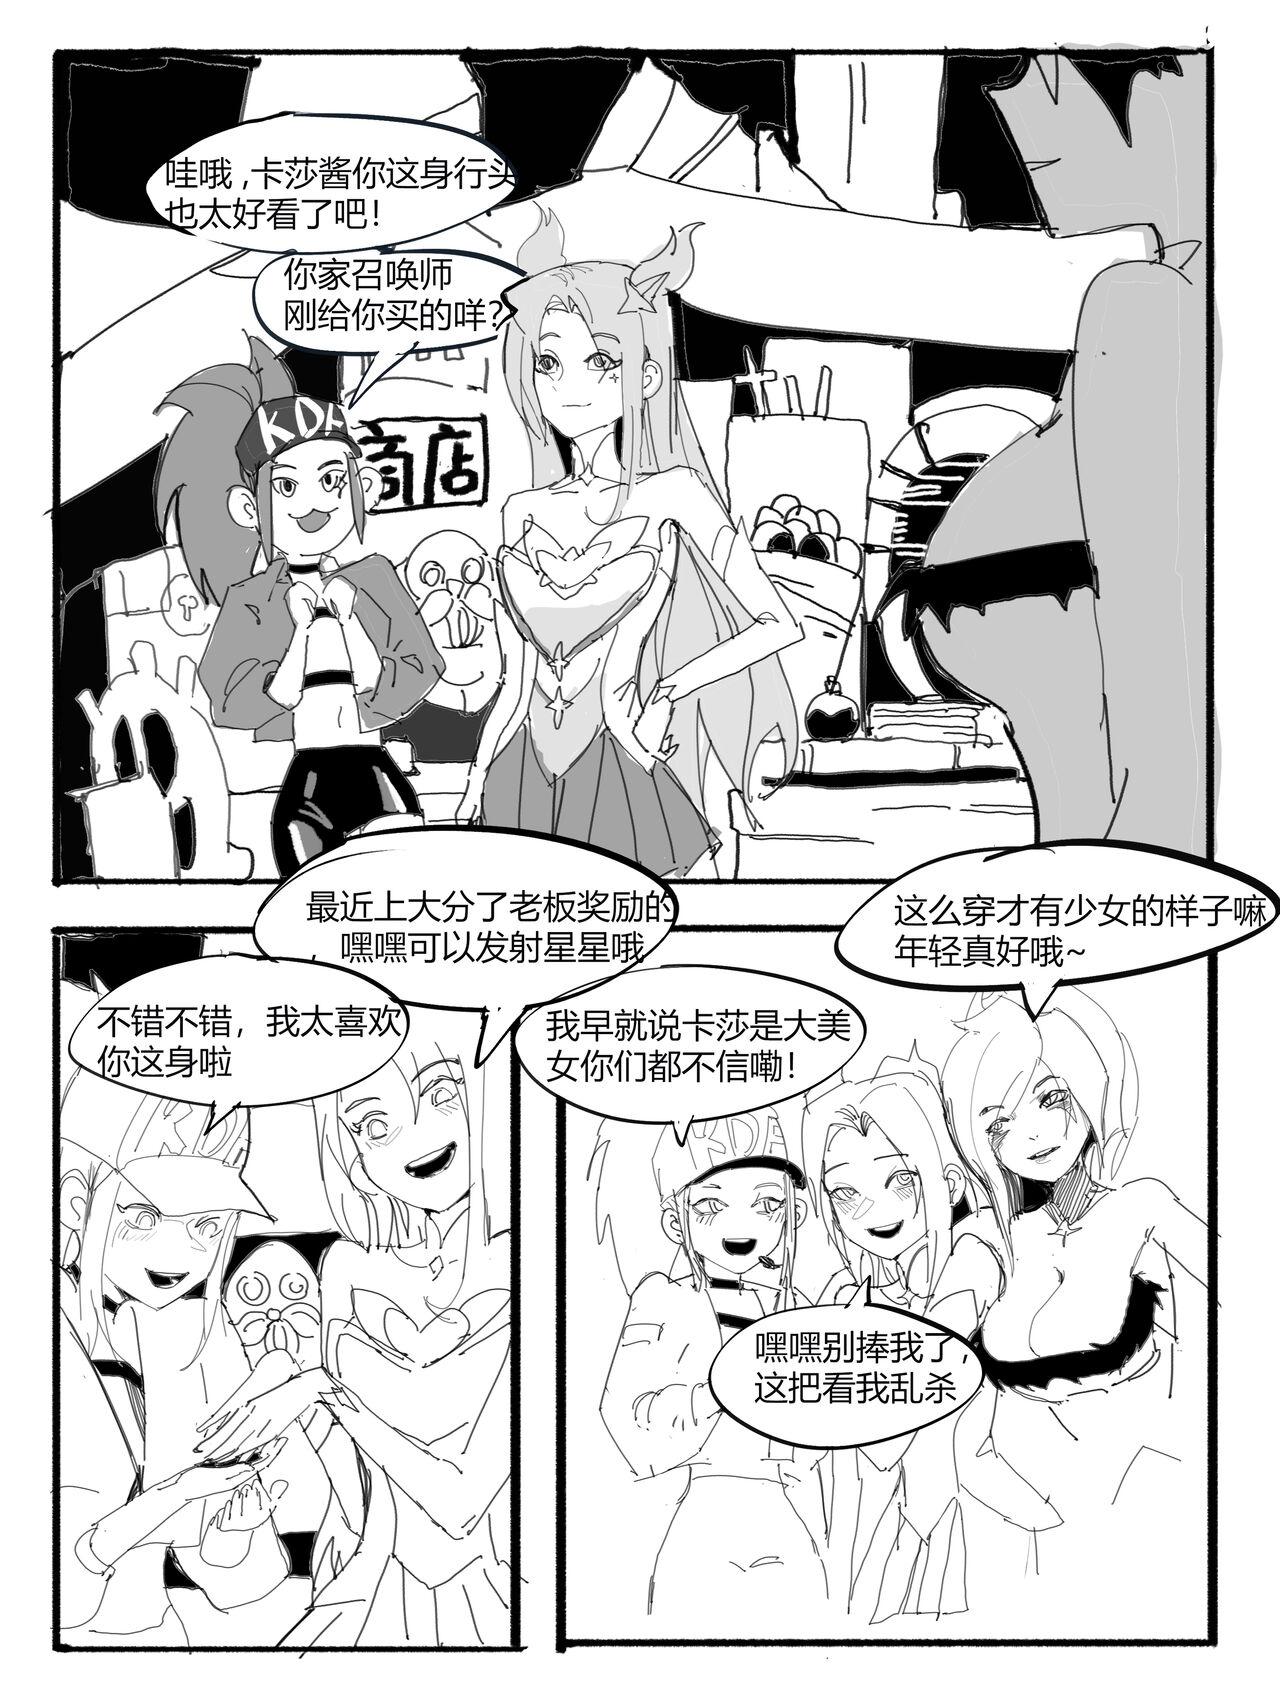 Family Taboo 被炼金男爵控制的中辅二人欺负卡莎 - League of legends Glamour Porn - Picture 2